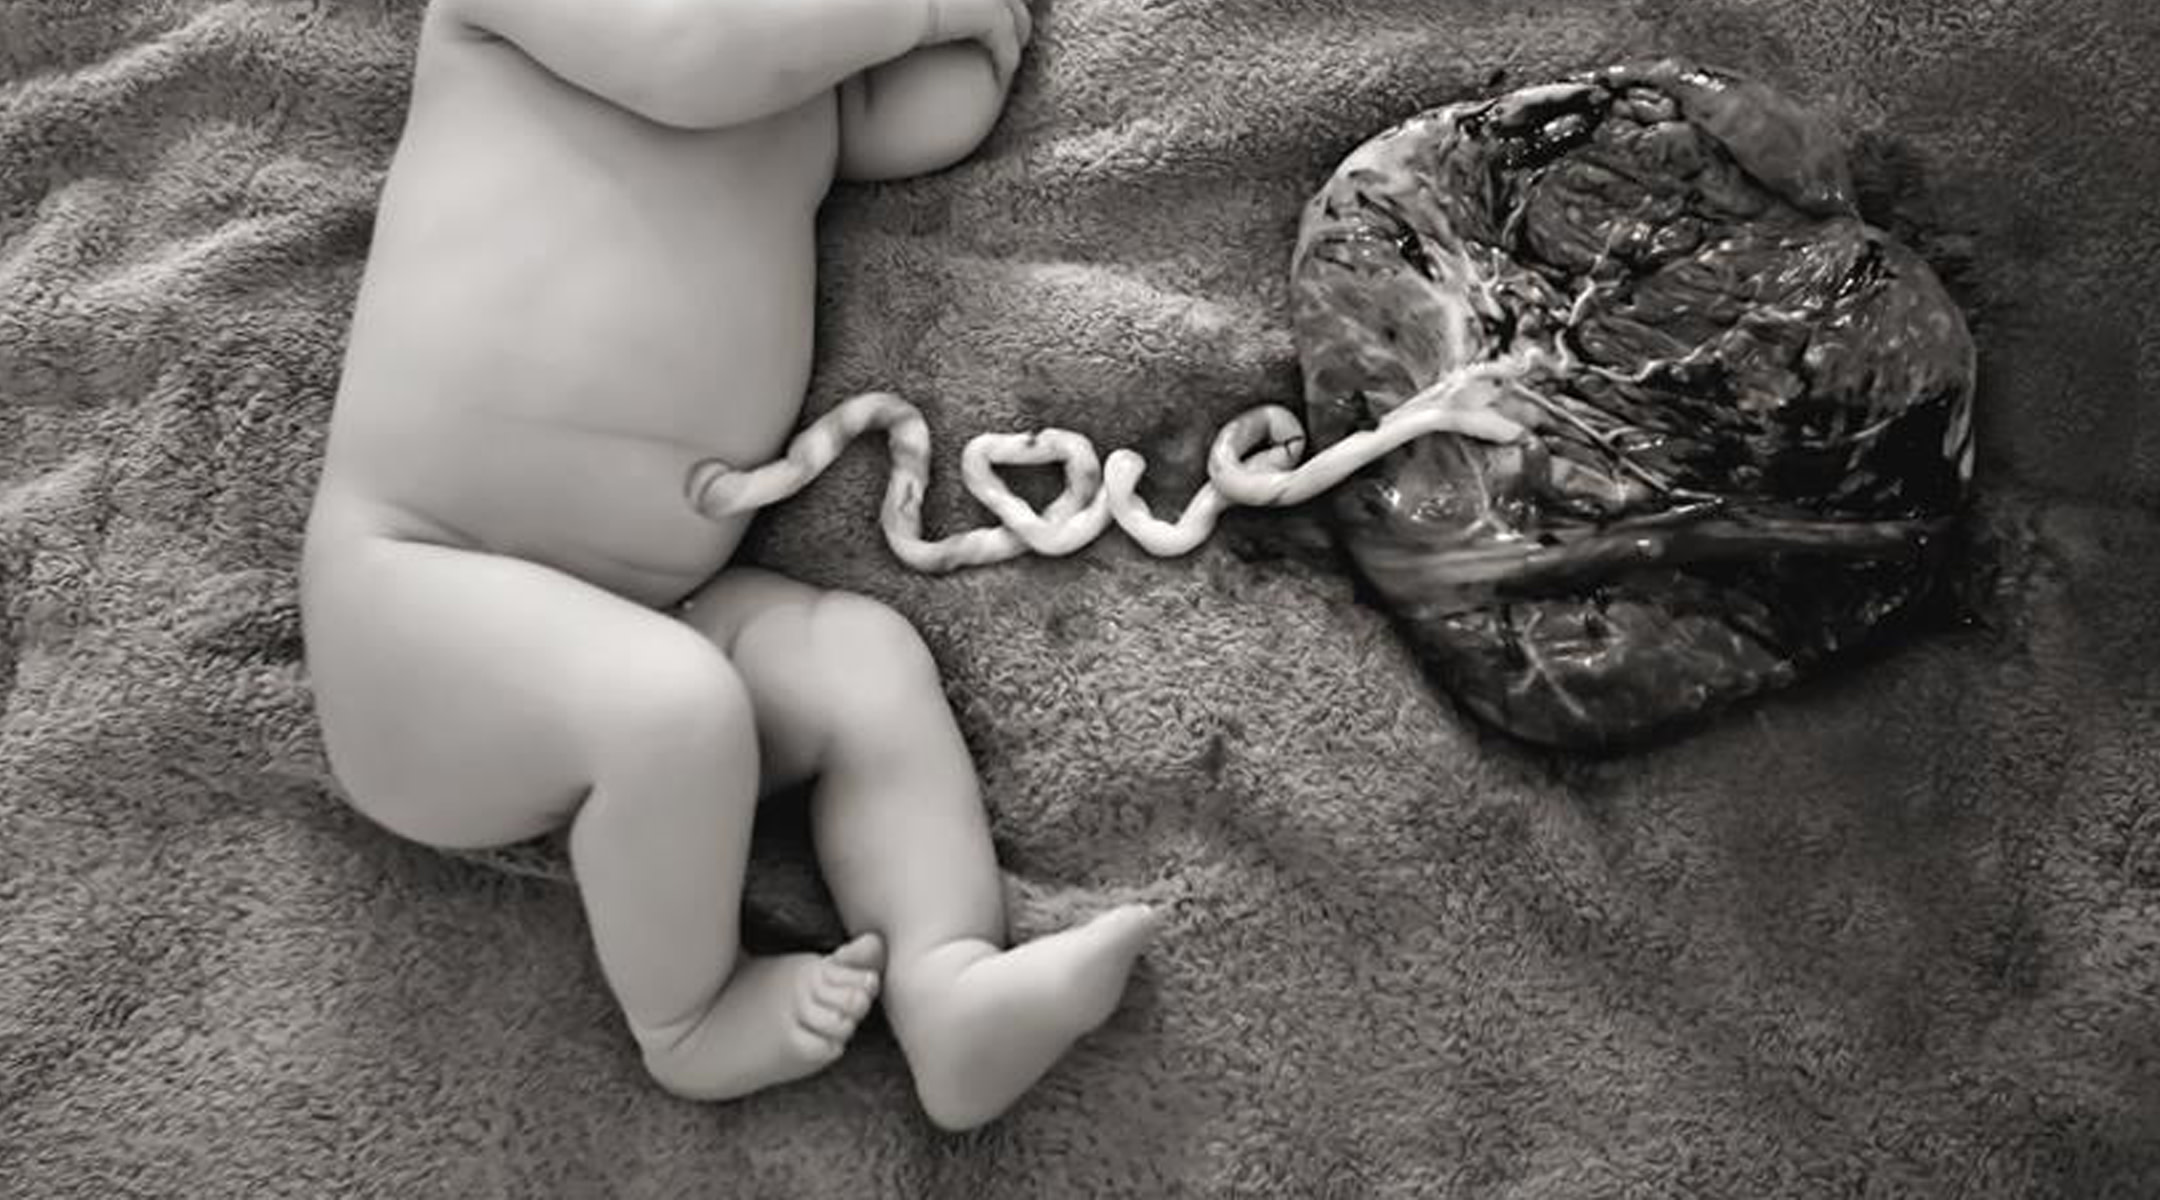 Newborn next to placenta with umbilical cord attached